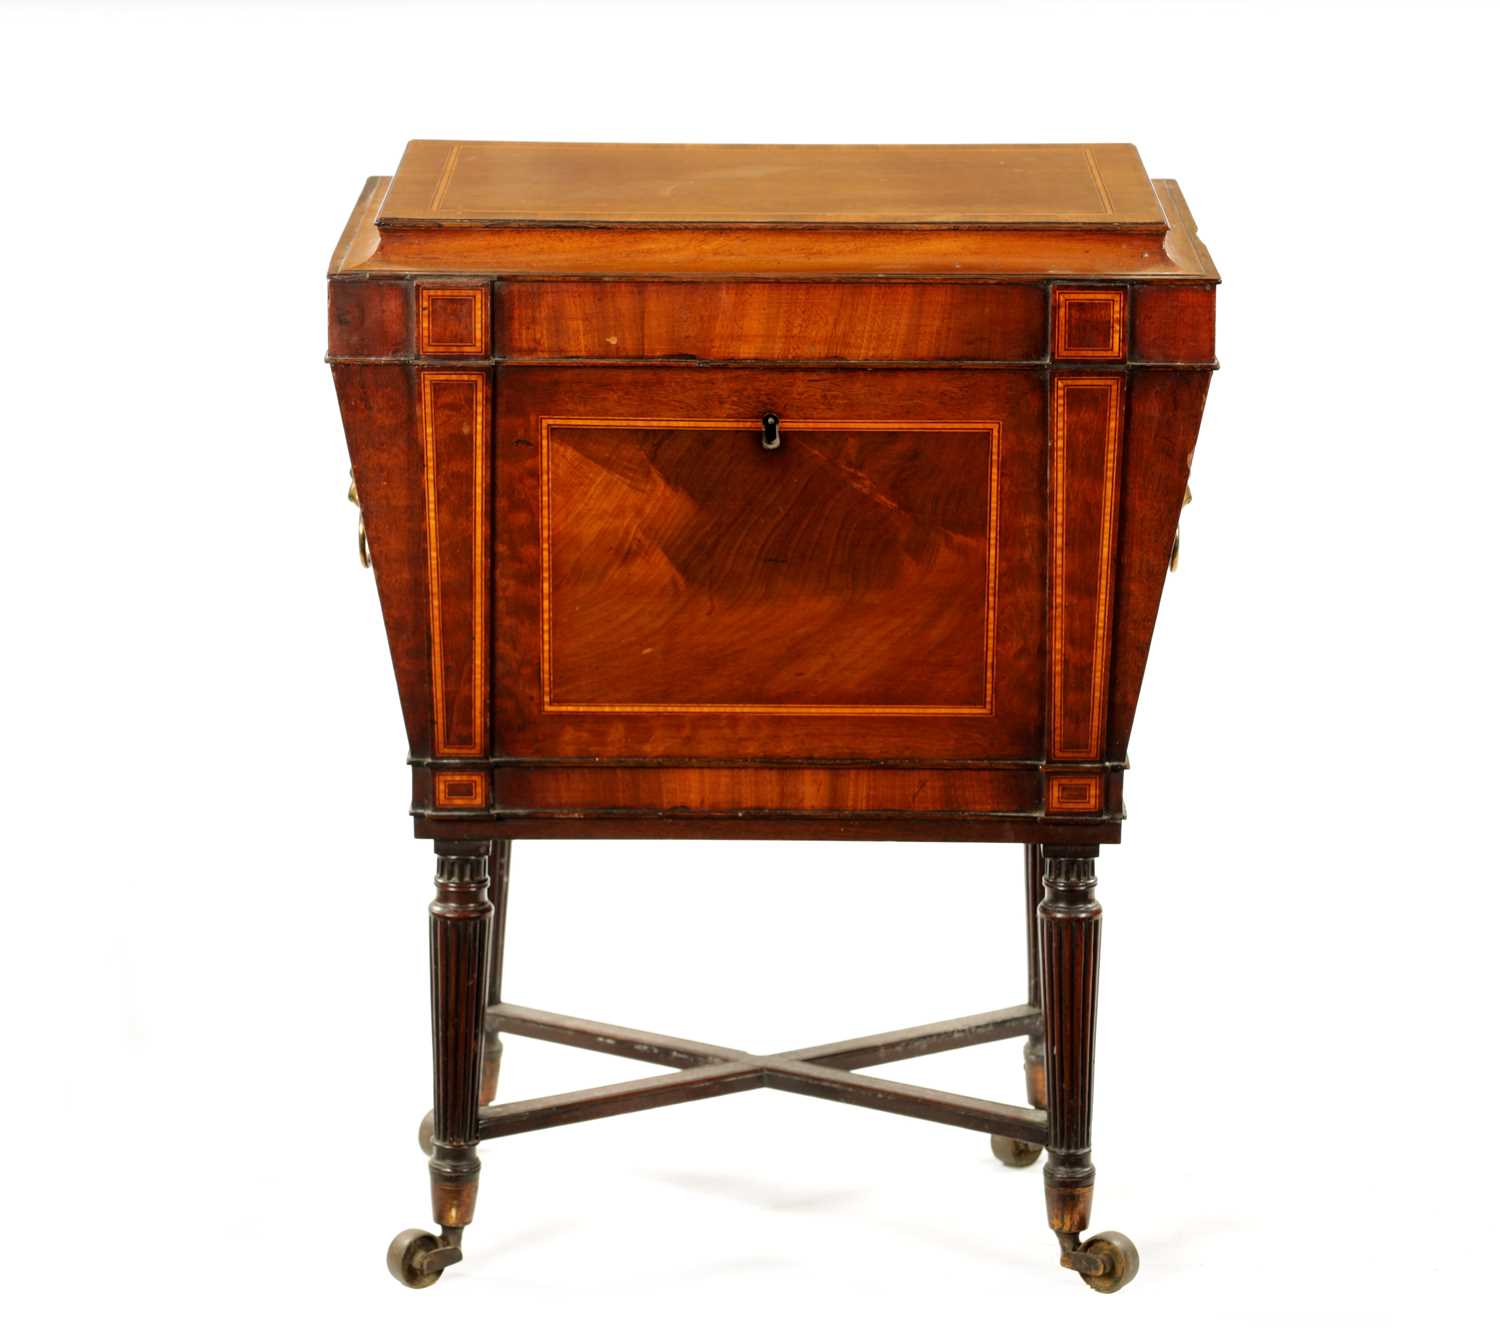 A REGENCY INLAID MAHOGANY CELLARETTE ON TAPERED FLUTED LEGS IN THE MANNER OF GILLOWS